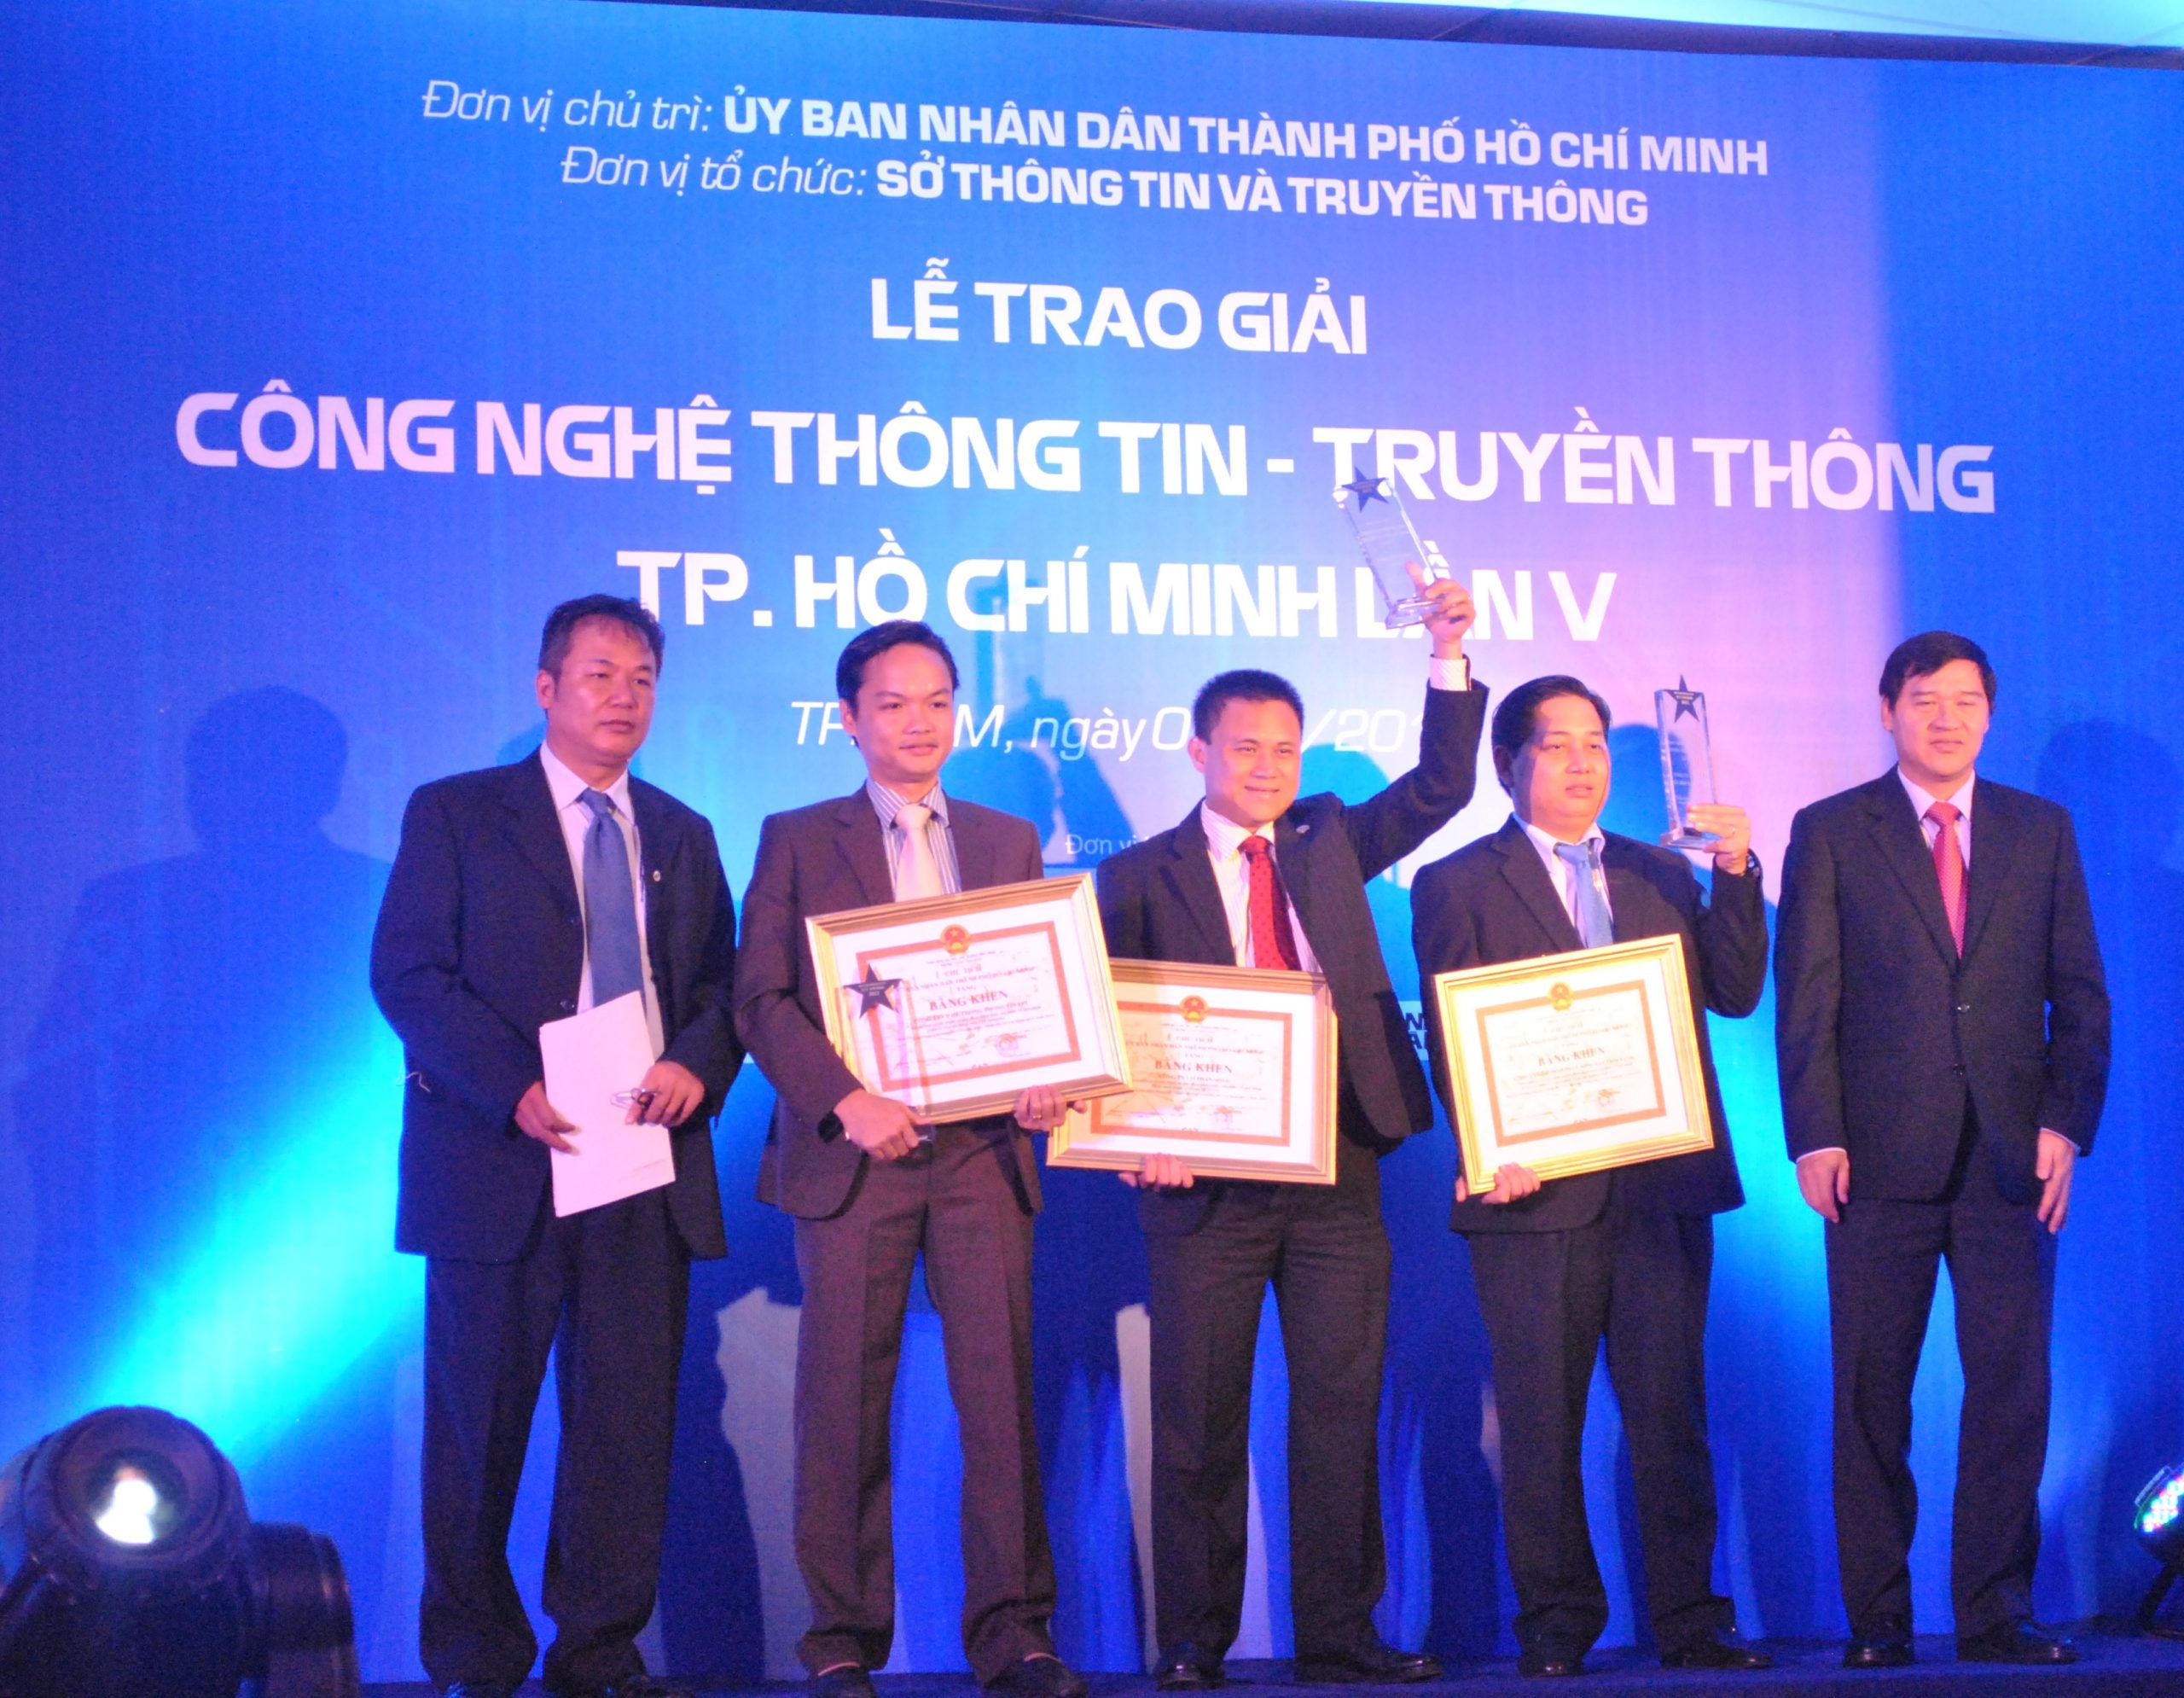 Ho Chi Minh City 5th Information and Communications Technology Awards – Hospital Management System (FPT.eHospital)